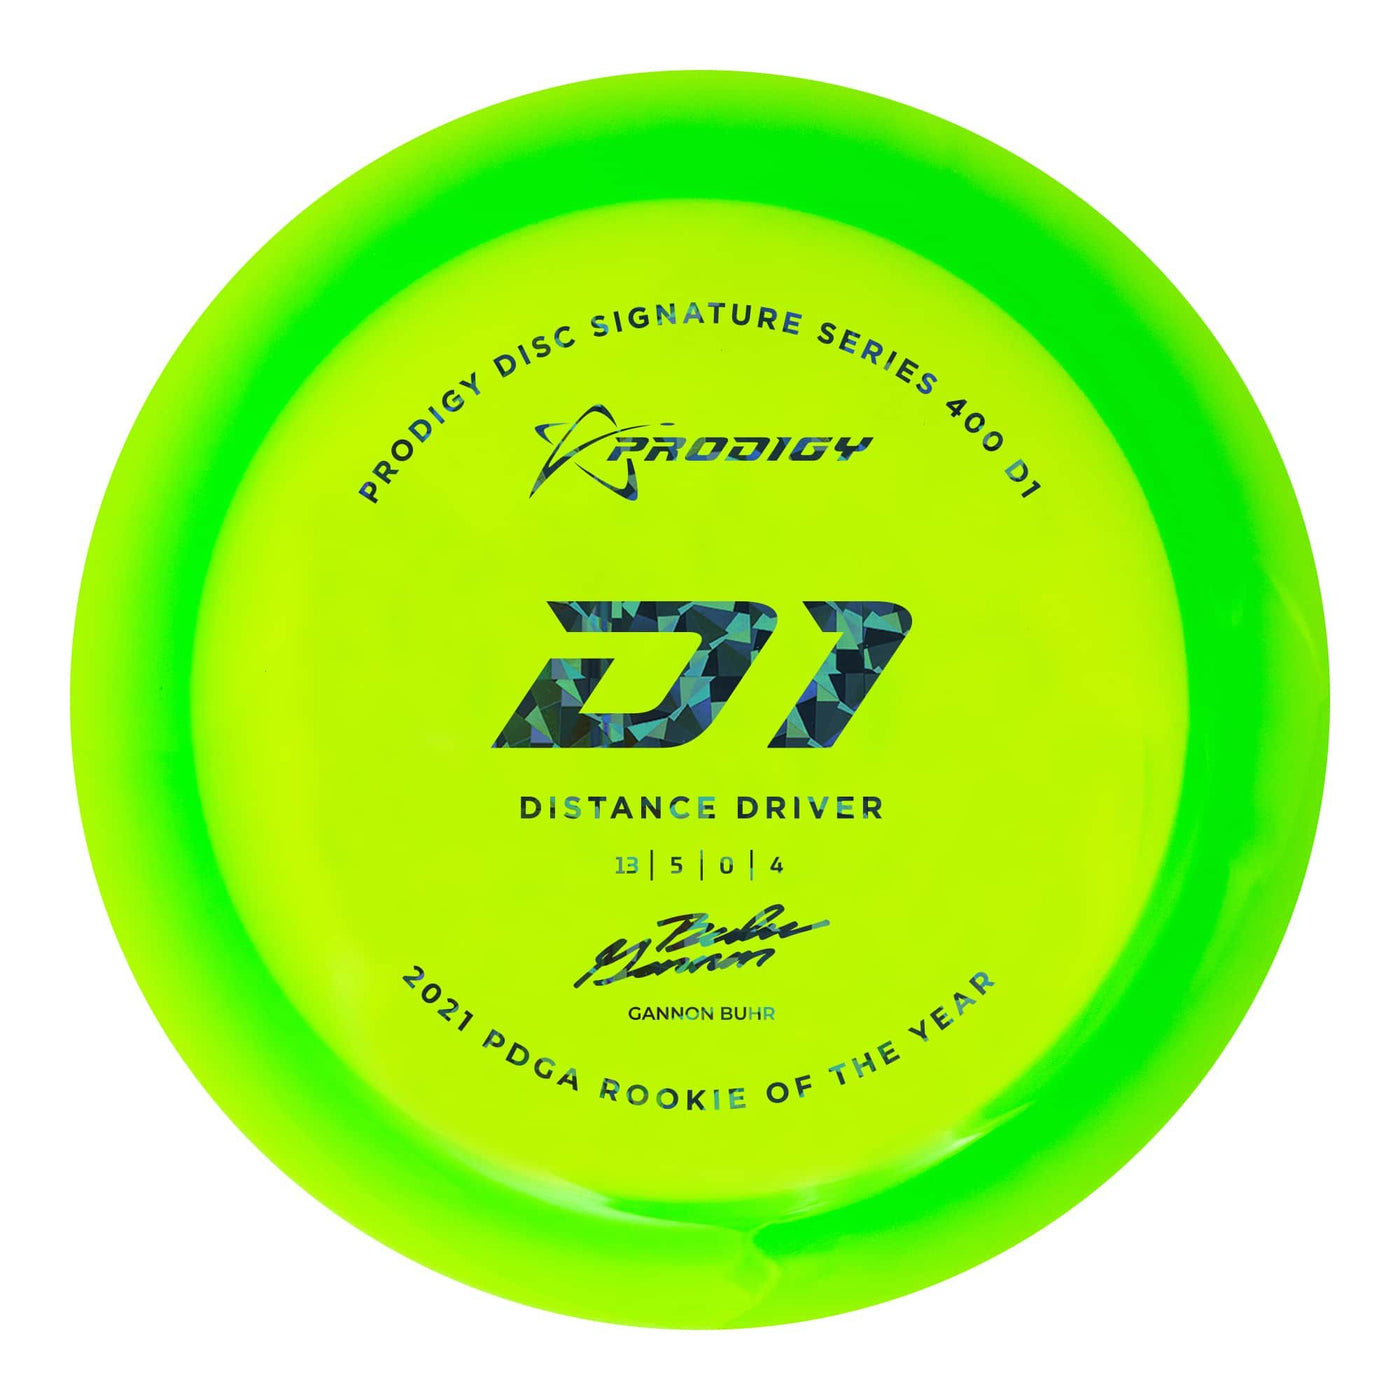 Prodigy 400 D1 Distance Driver with 2022 Signature Series Gannon Buhr - 2021 PDGA Rookie of the Year Stamp - Speed 12